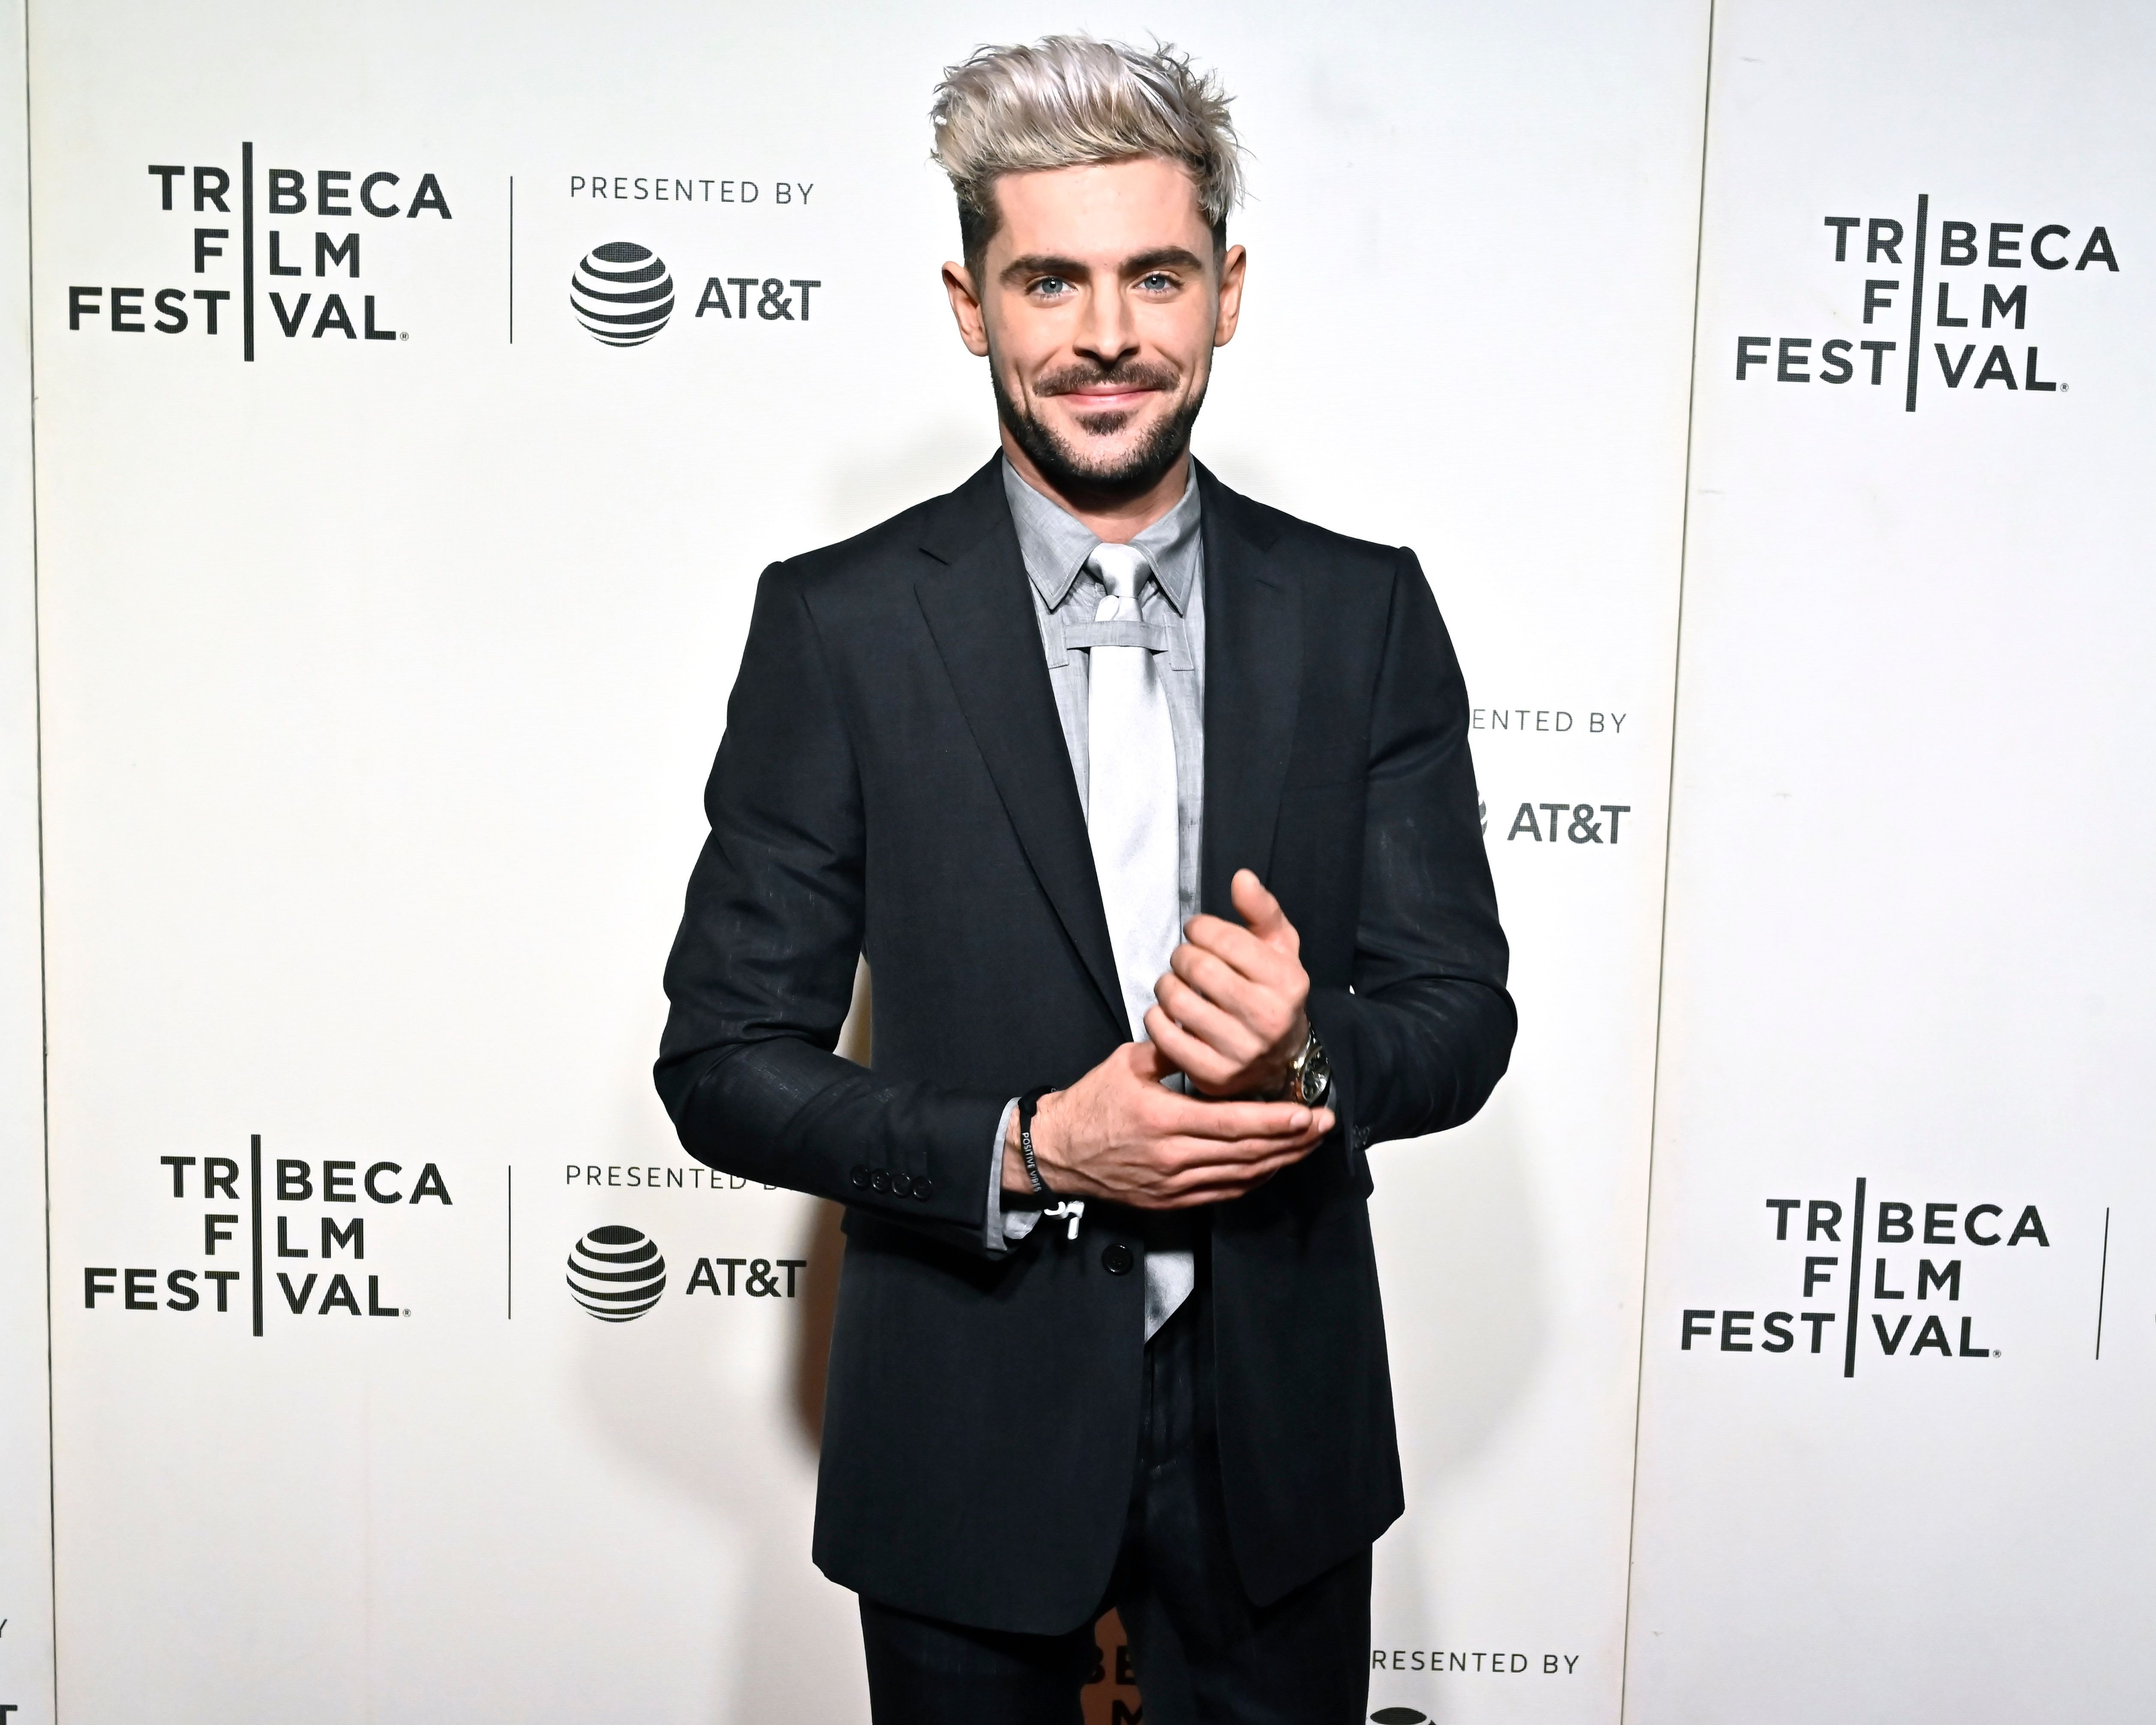 Zac Efron at Netflix's "Extremely Wicked, Shockingly Evil and Vile" Tribeca Film Festival Premiere at BMCC Tribeca Performing Arts Center on May 02, 2019 | Photo: Getty Images